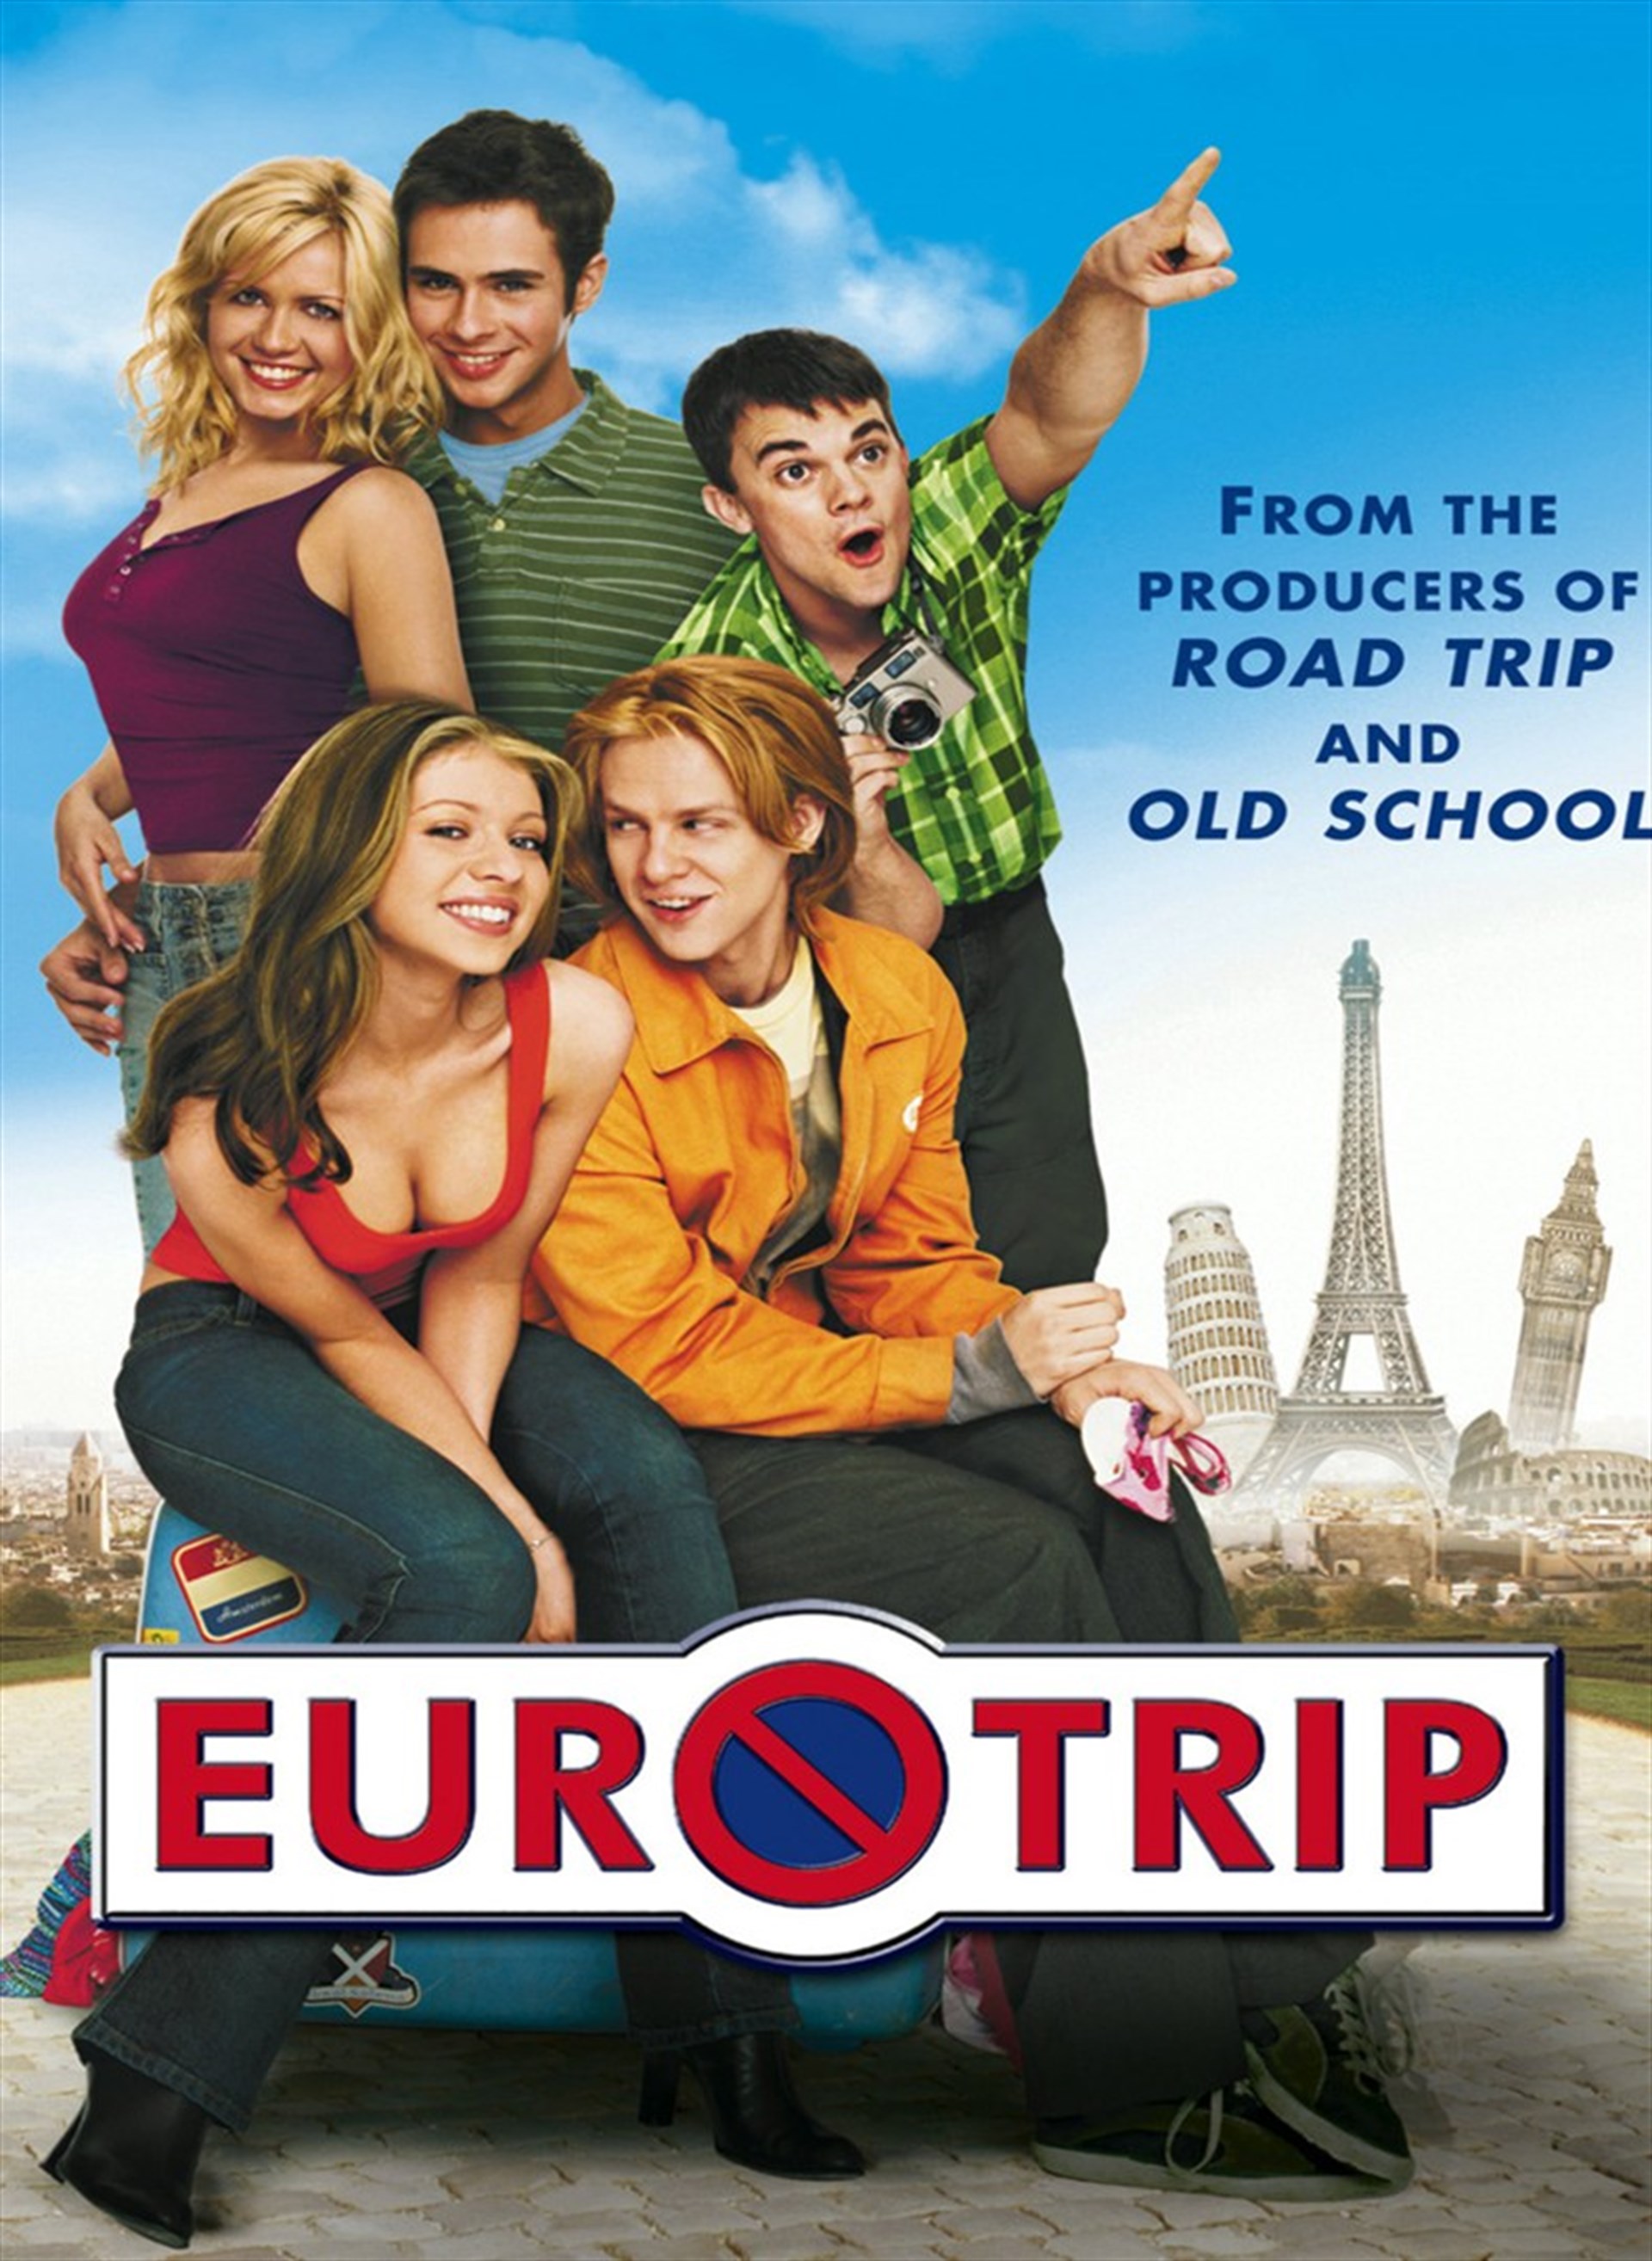 aayush ak recommends eurotrip full movie download pic